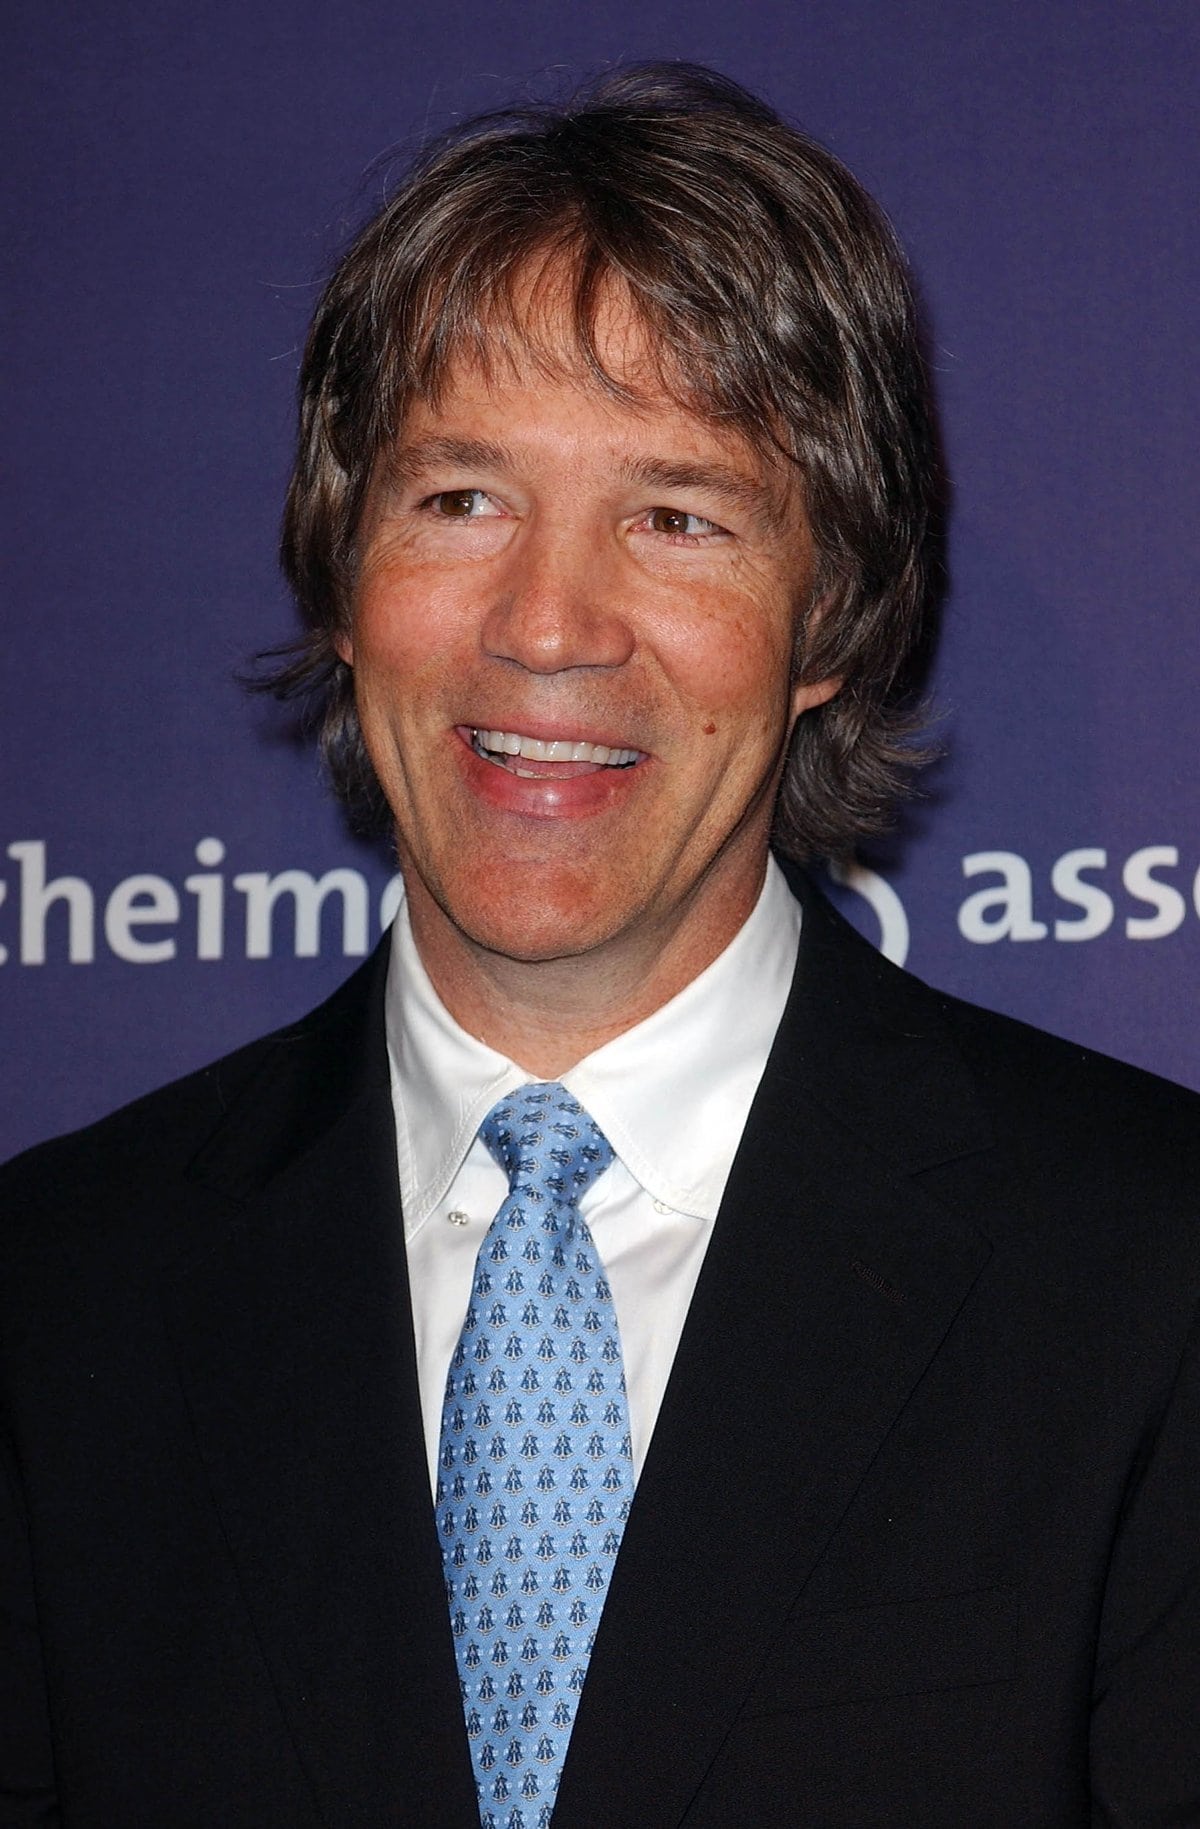 Legendary television writer and producer David E. Kelley is the creator of popular series such as Doogie Howser, M.D., Picket Fences, Chicago Hope, The Practice, Ally McBeal, Boston Public, Boston Legal, Harry's Law, Goliath, Big Little Lies, Mr. Mercedes, Big Sky, and Nine Perfect Strangers